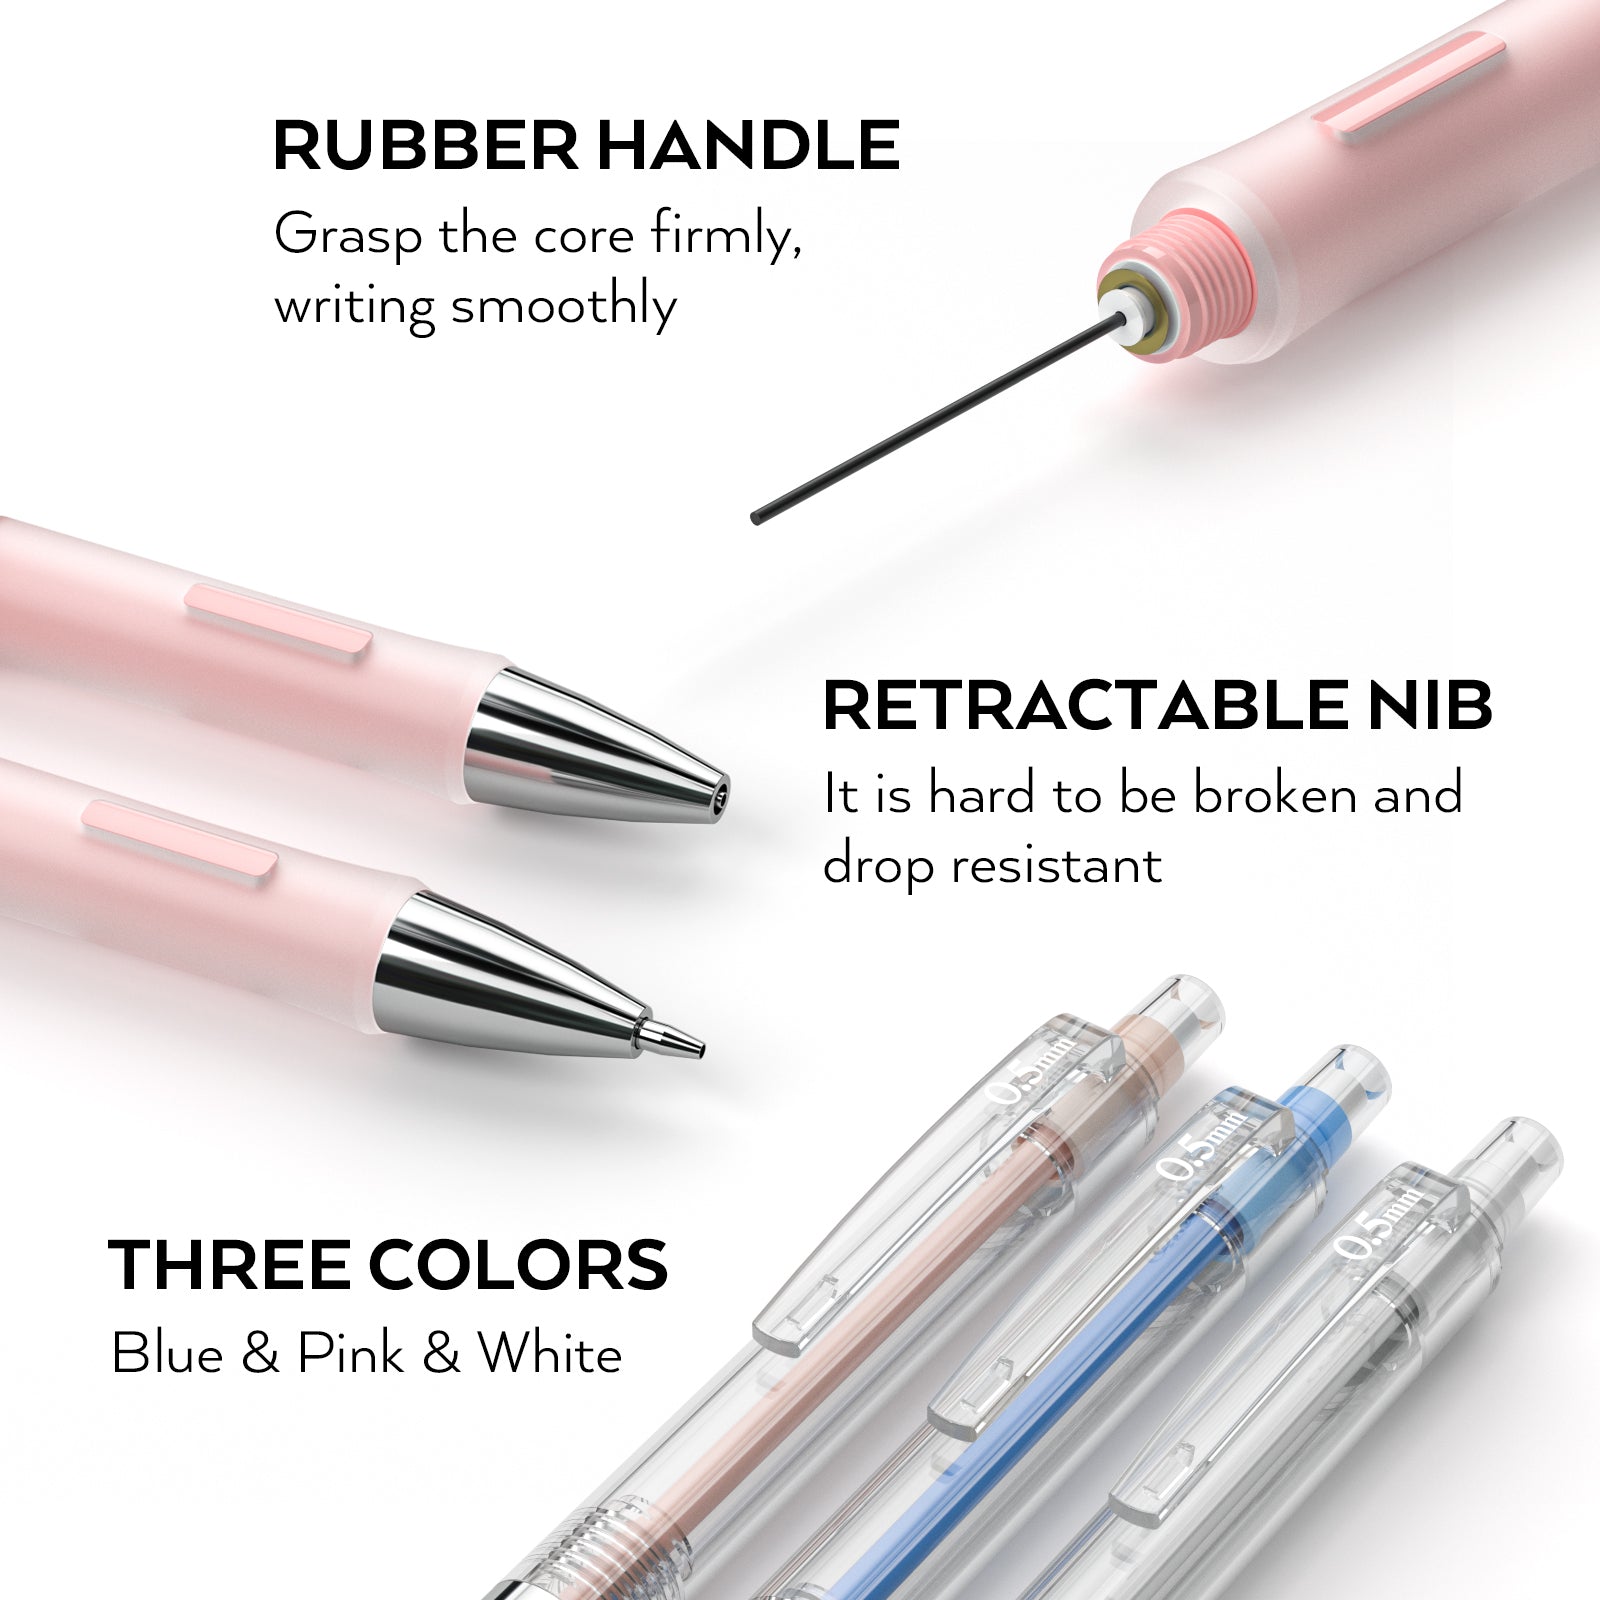 Nicpro 3 PCS Pastel Mechanical Pencil 0.5 with Case for School, with 6 tubes HB Lead Refills, 3 x Erasers, 9 x Eraser Refills for Student Writing, Drawing, Sketching, Blue & Pink & White Colors